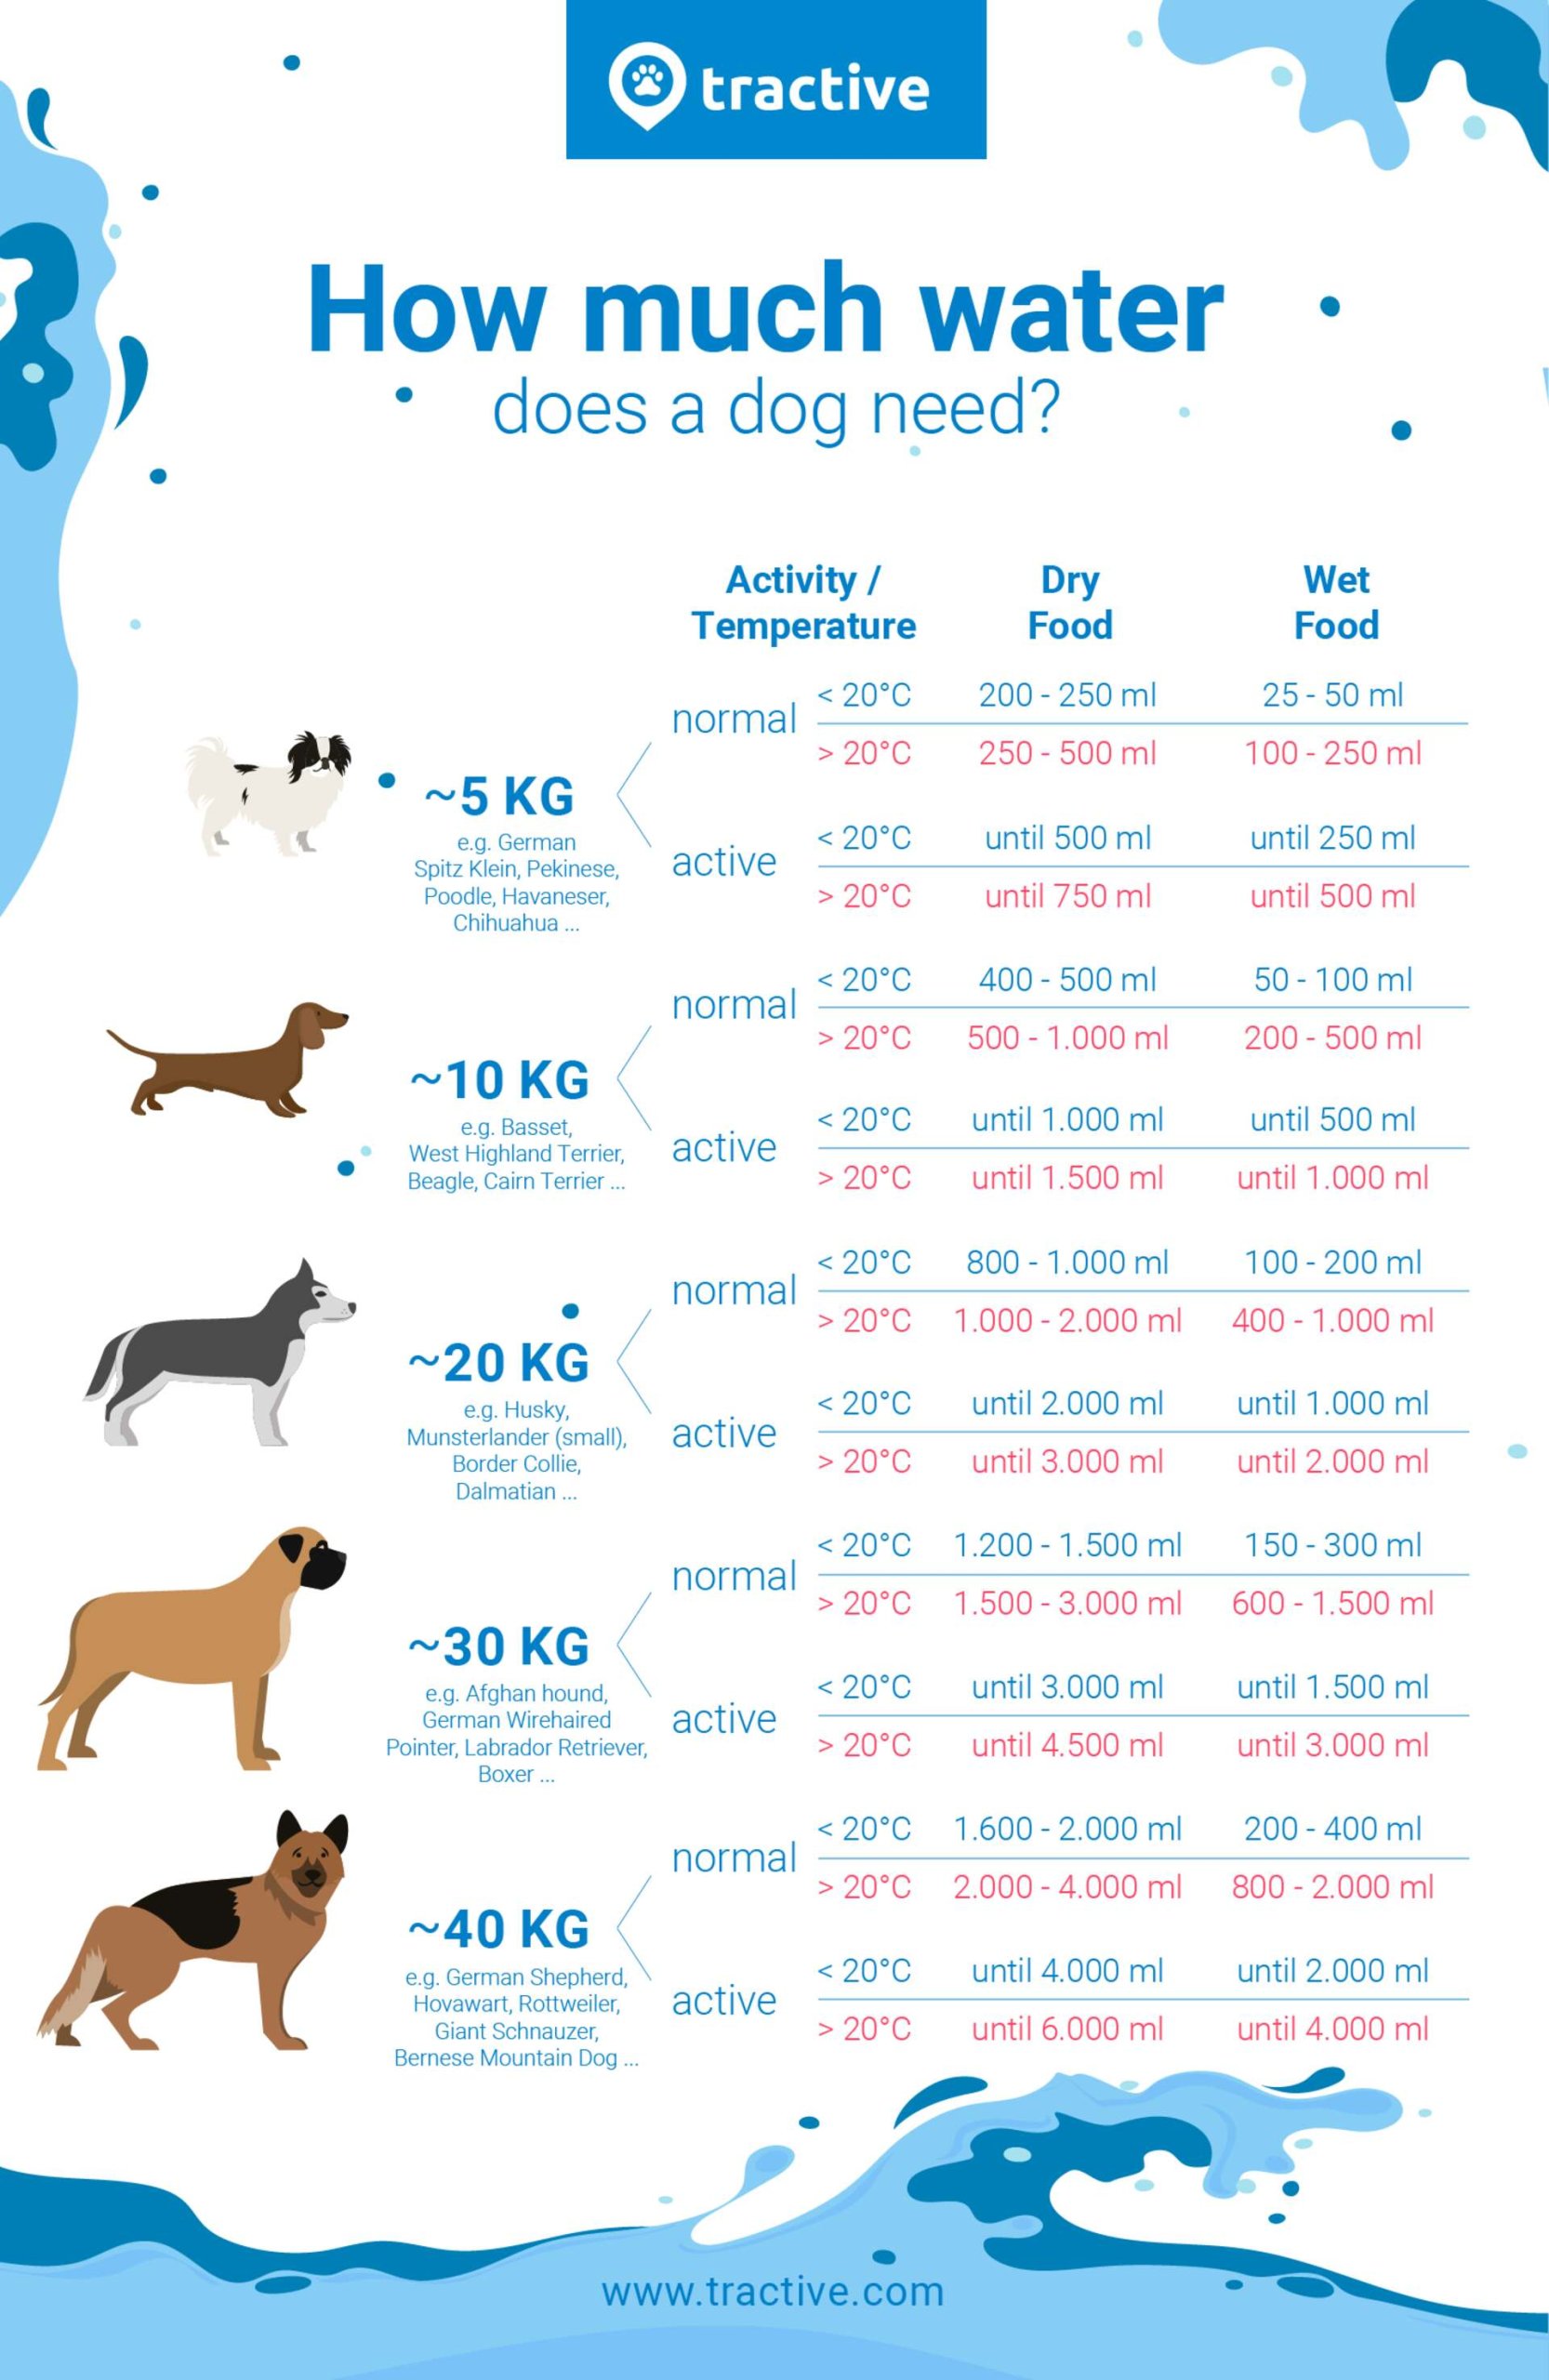 Infographic summarizing how much water a dog should drink per day